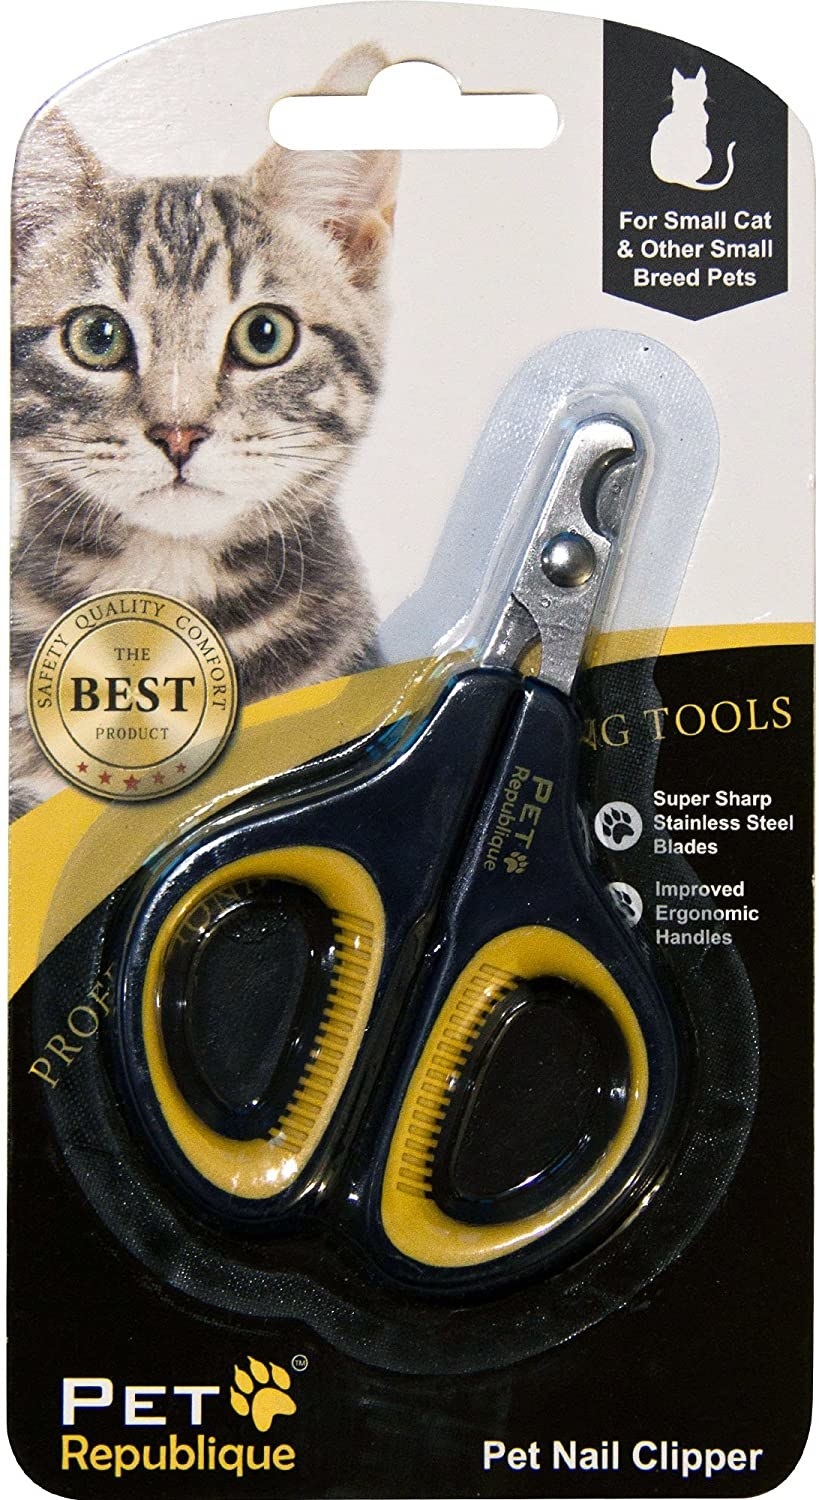 25 Under50 Cat Products From Amazon That Are Just Plain Useful